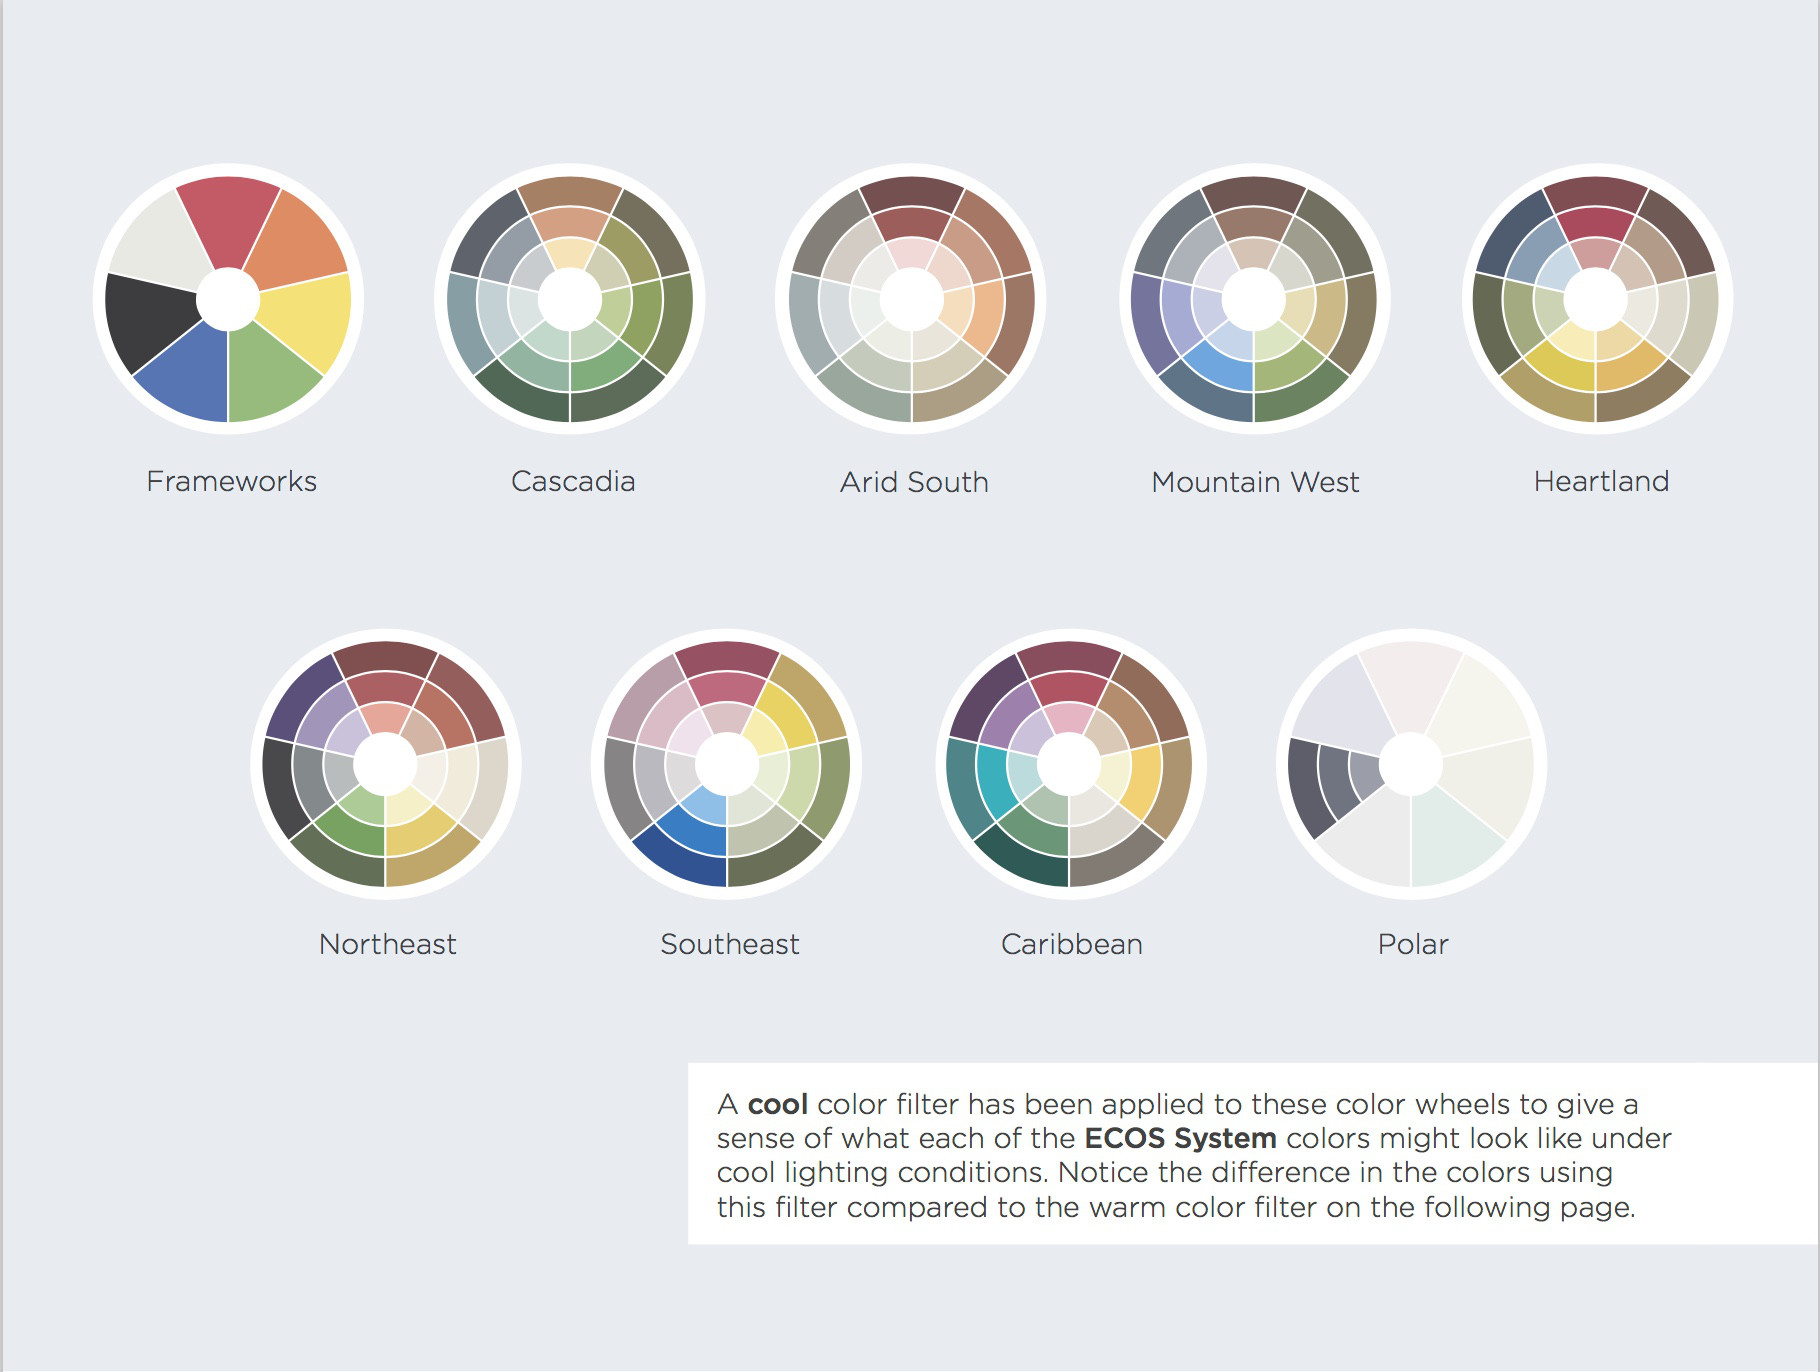 A cool color filter has been applied to these color wheels to give a sense of what each of the ECOS System colors might look like under cool lighting conditions. Notice the difference in the colors using this filter compared to the warm color filter on the following page.